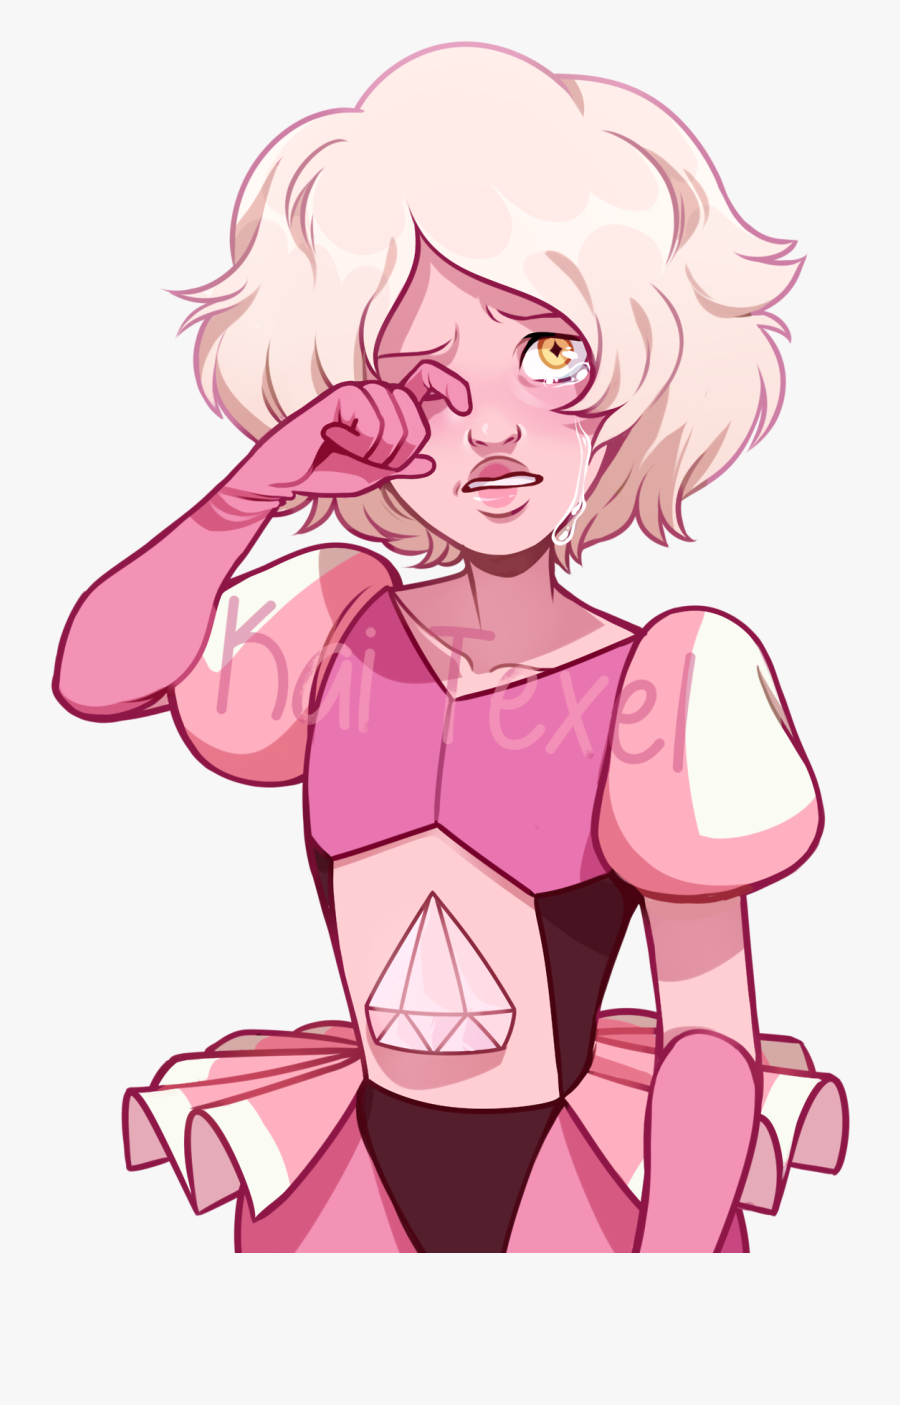 A Pink Diamond Commission I Made For Cartoon Universe - Fanart Steven Universe Pink Diamond, Transparent Clipart